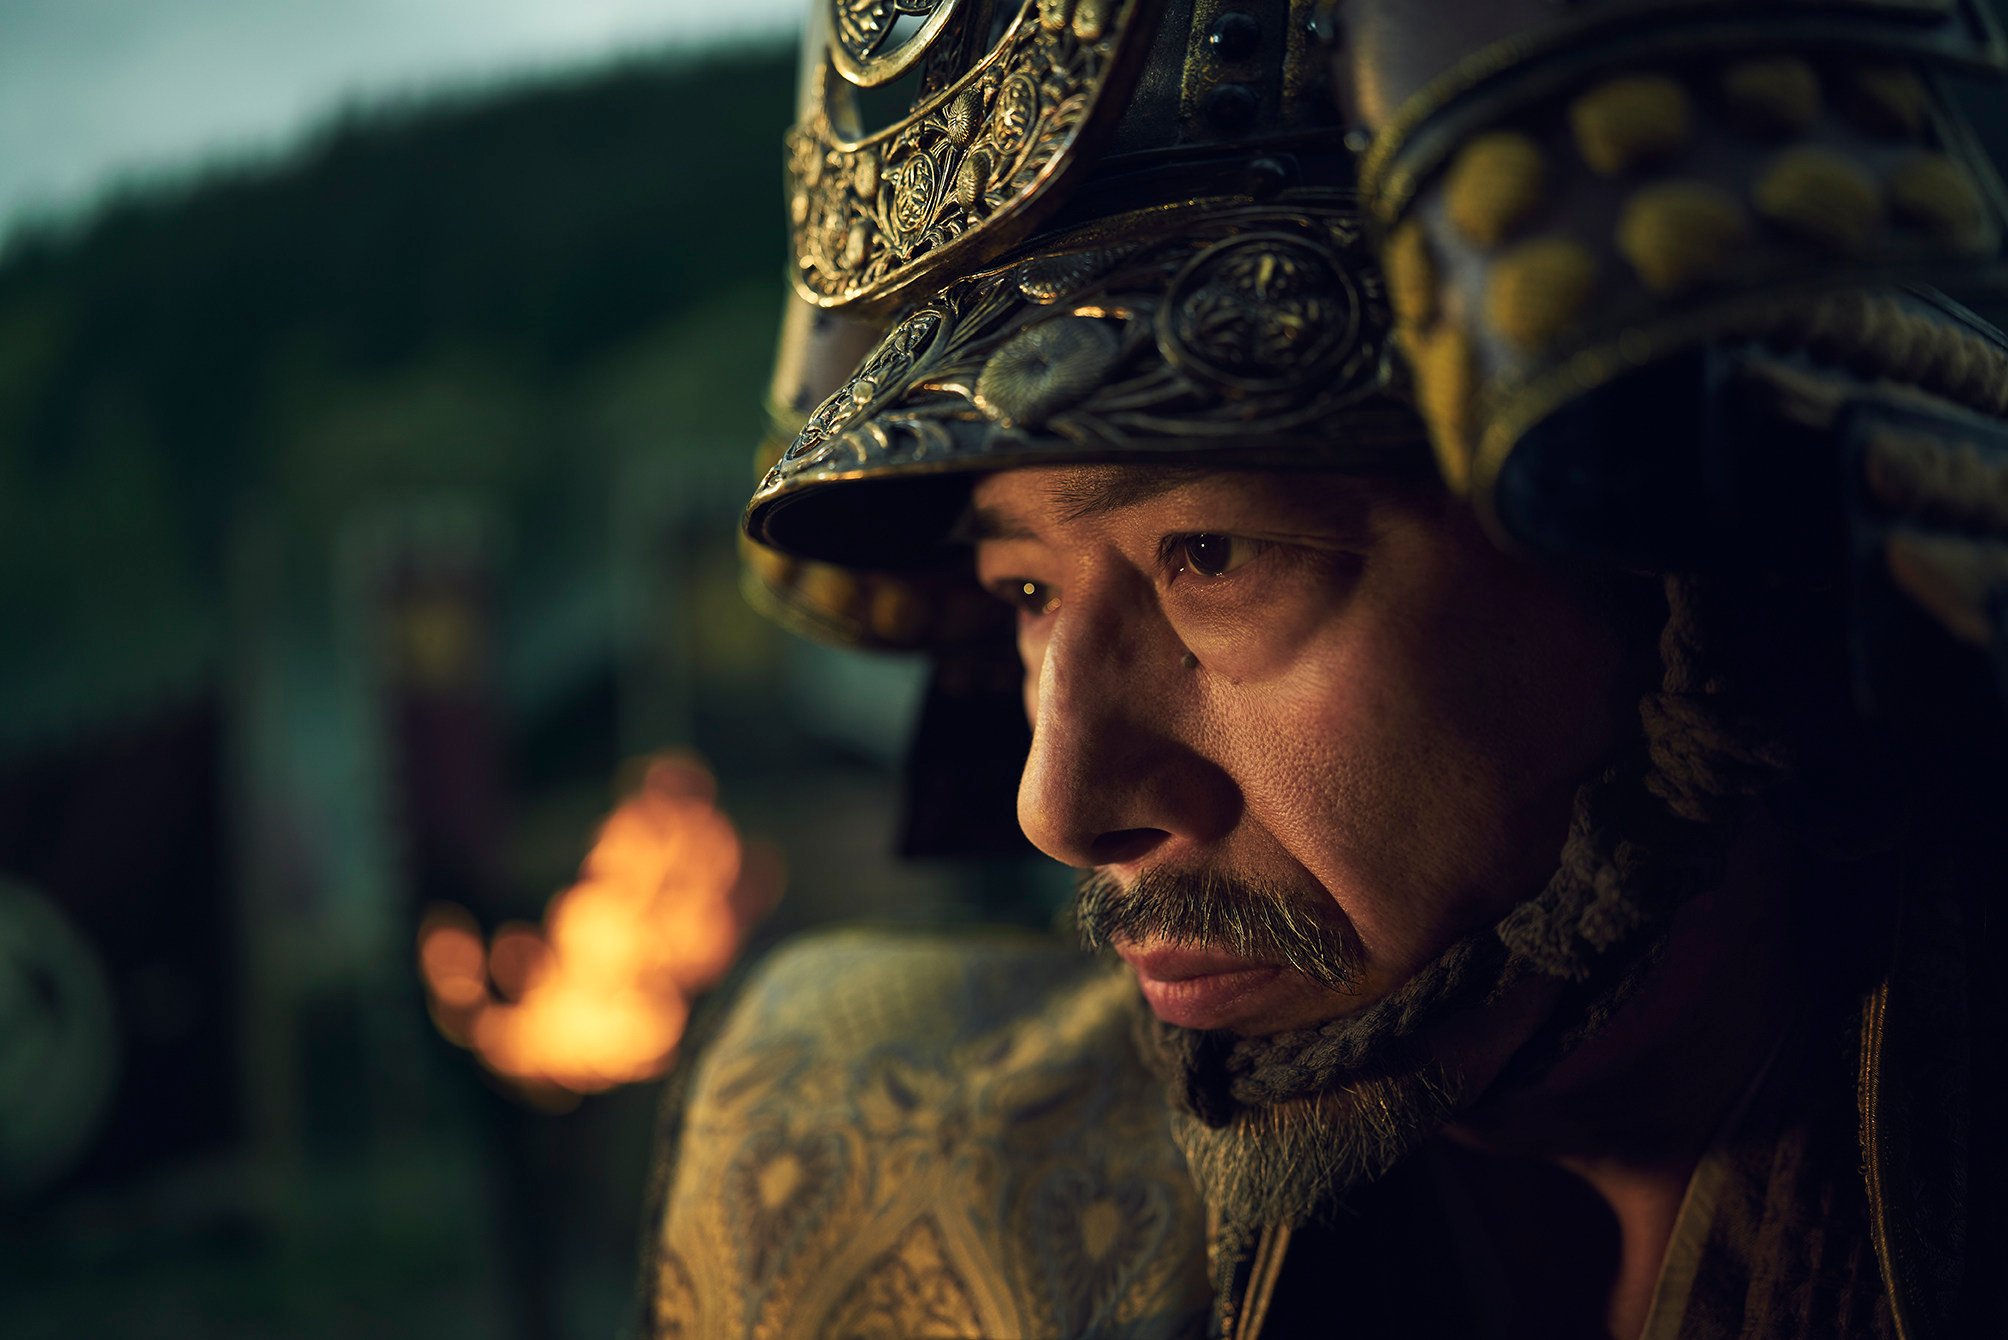 Hiroyuki Sanada in a still from Shogun, an adaptation of James Clavell’s novel about a British sailor’s adventures in feudal Japan. Photo: Disney+